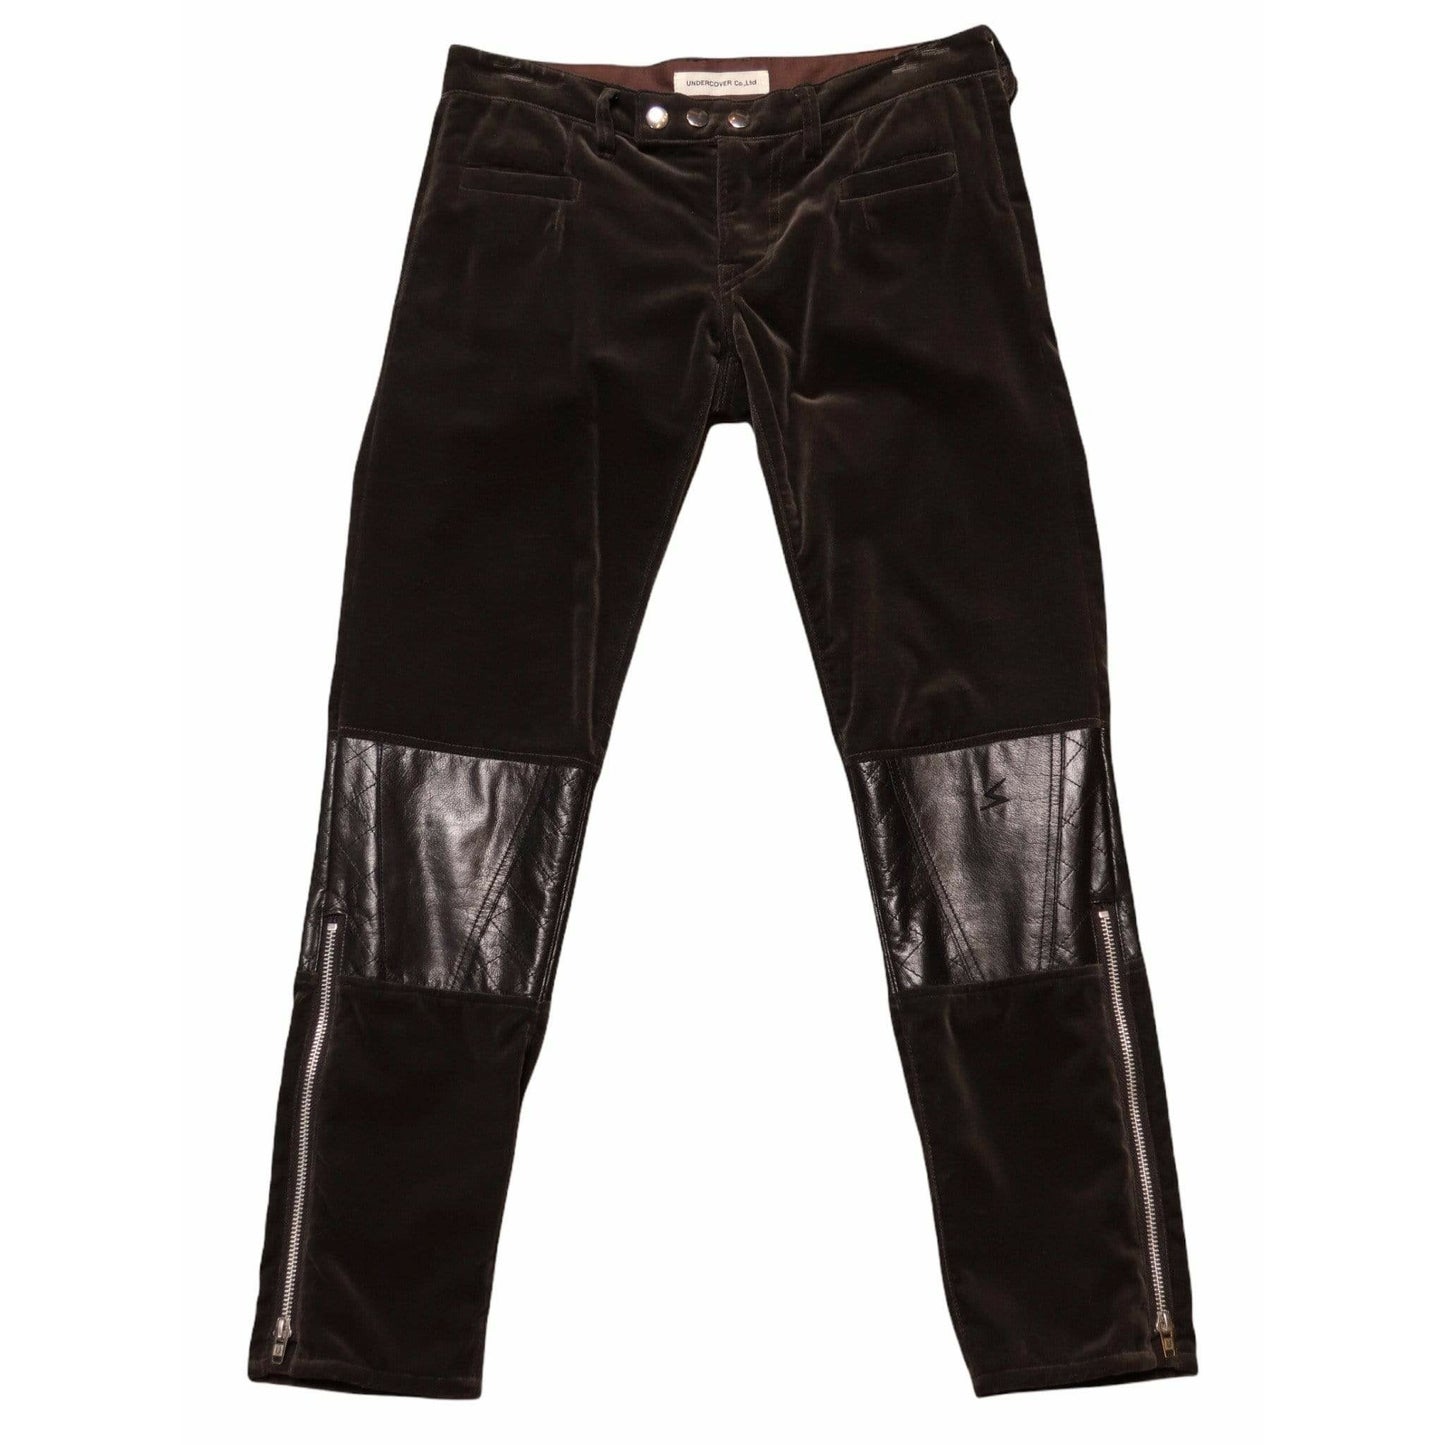 Pants undercover-charcoal-straight-pant Black